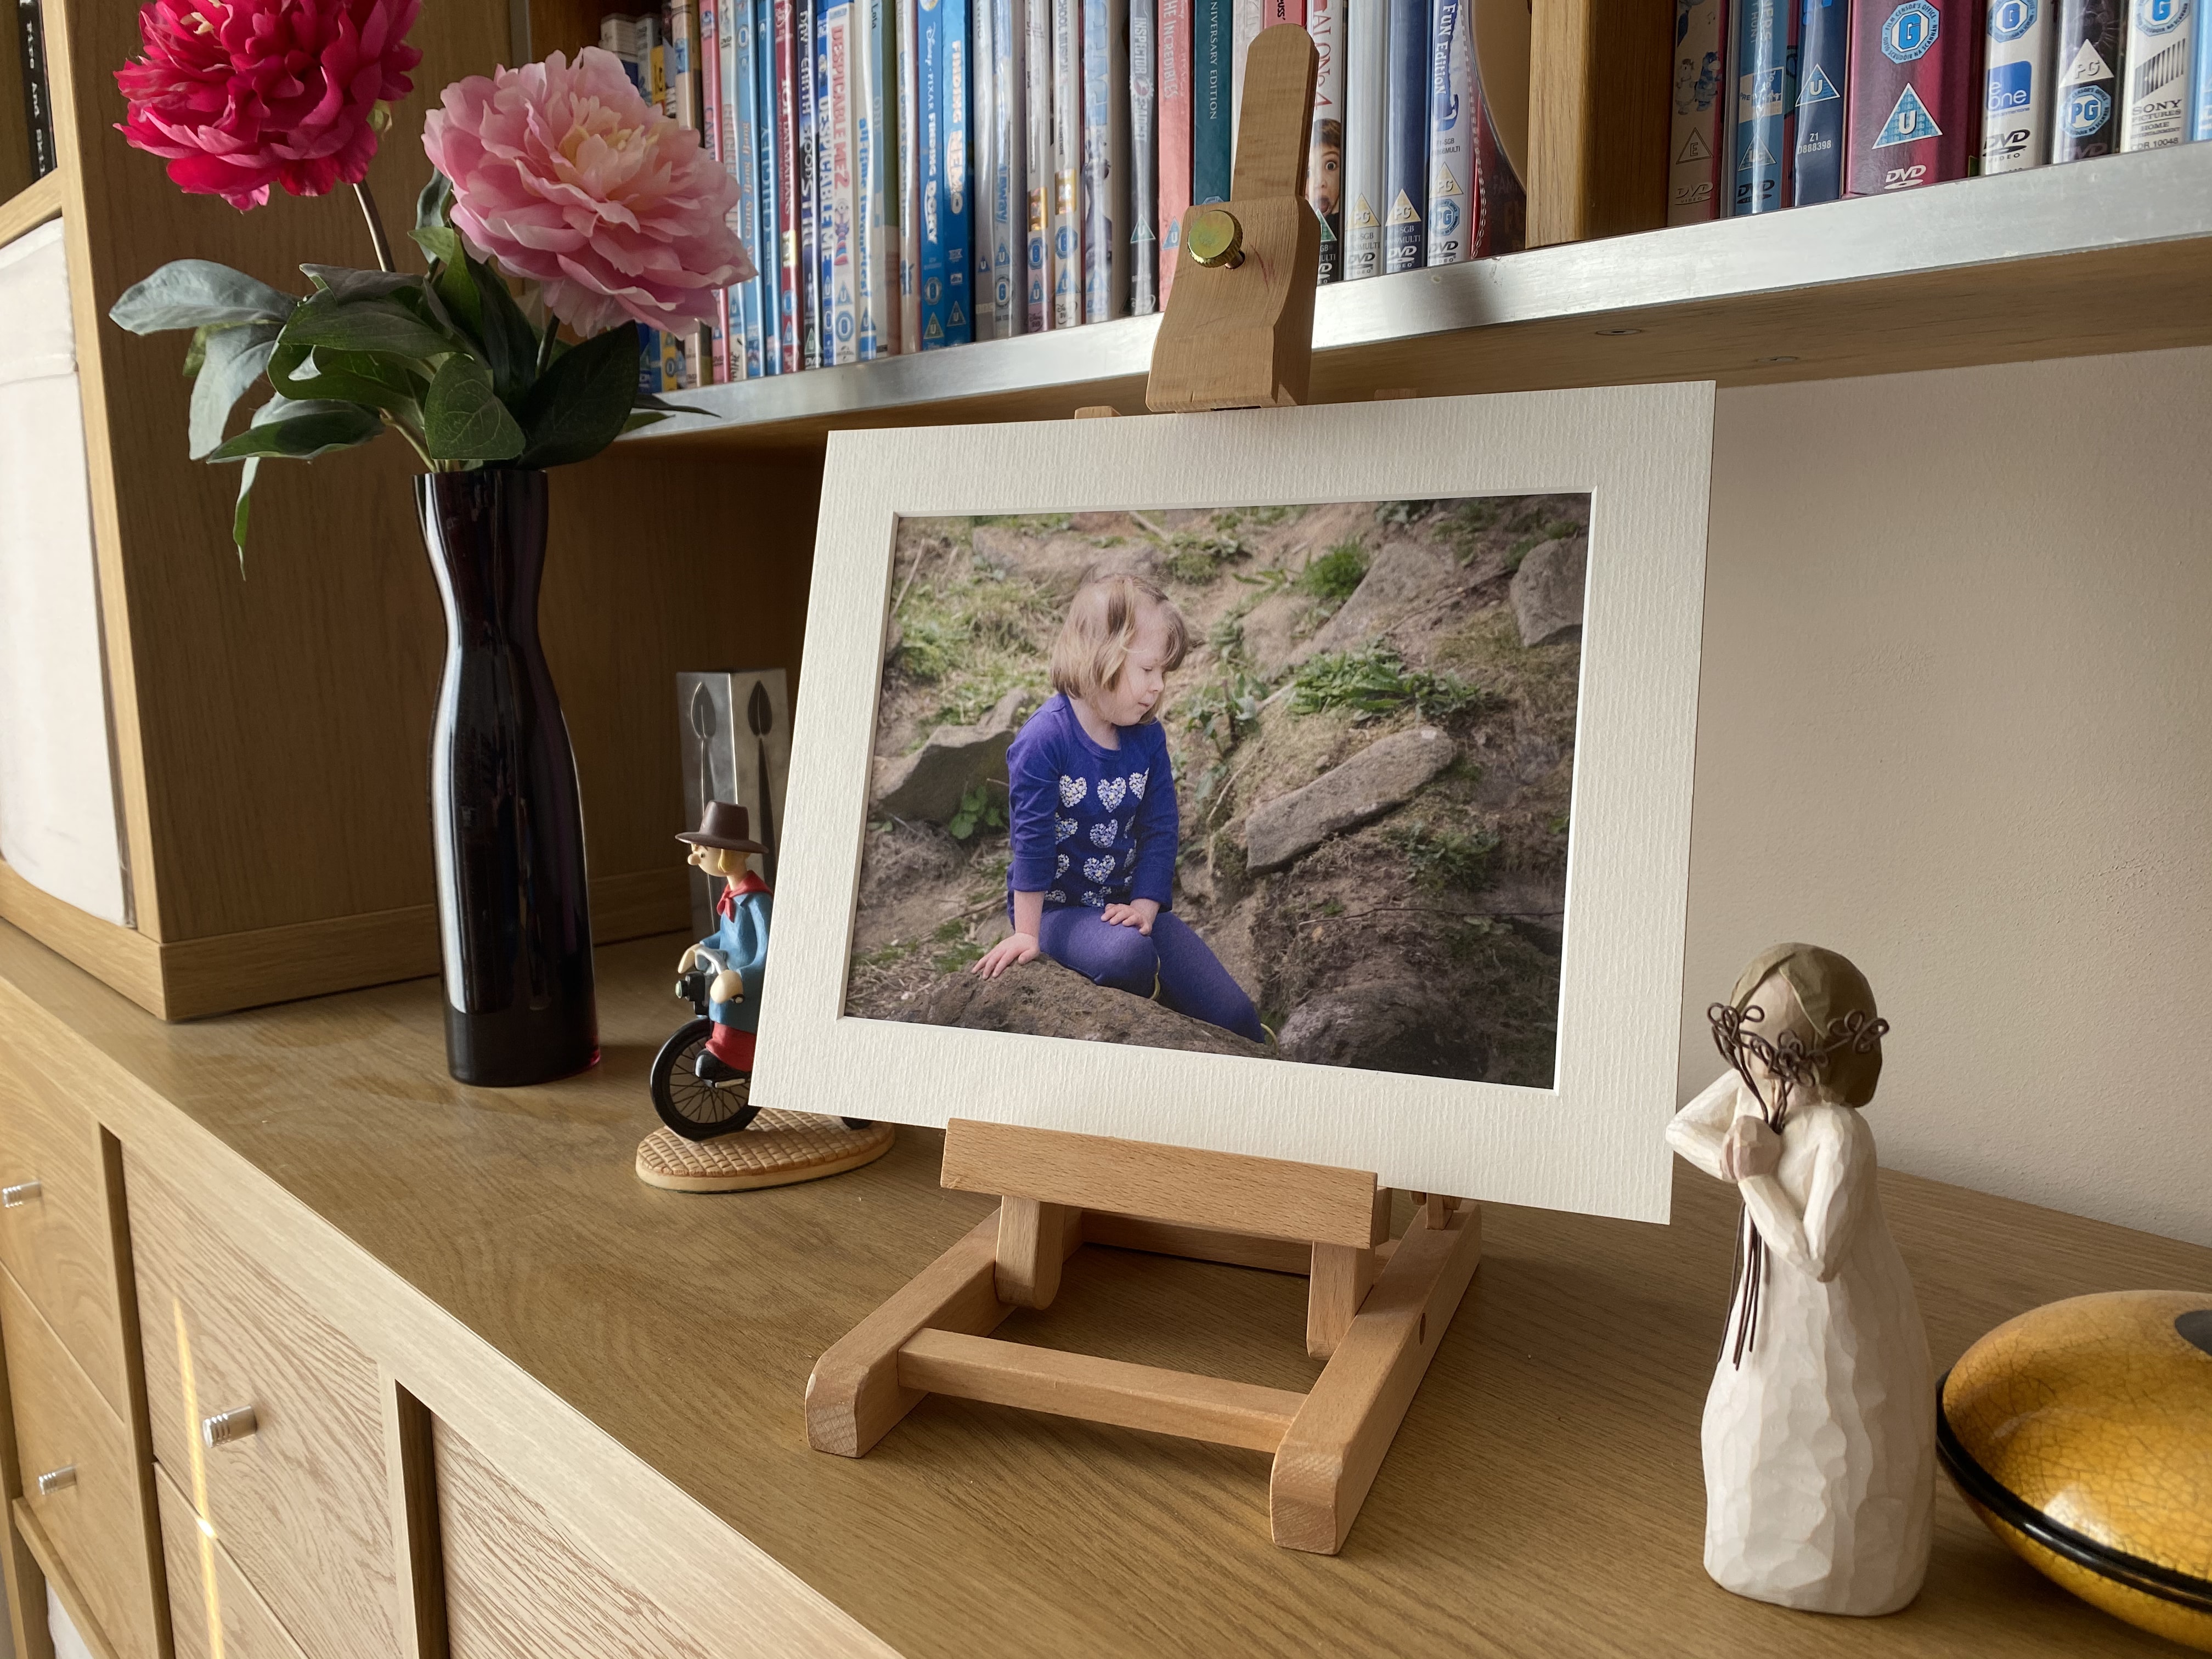 A child wearing blue and looking to the side, sitting on a rock. The image is in a light-coloured, slim mounting frame and in an easel, surrounded by ornaments.